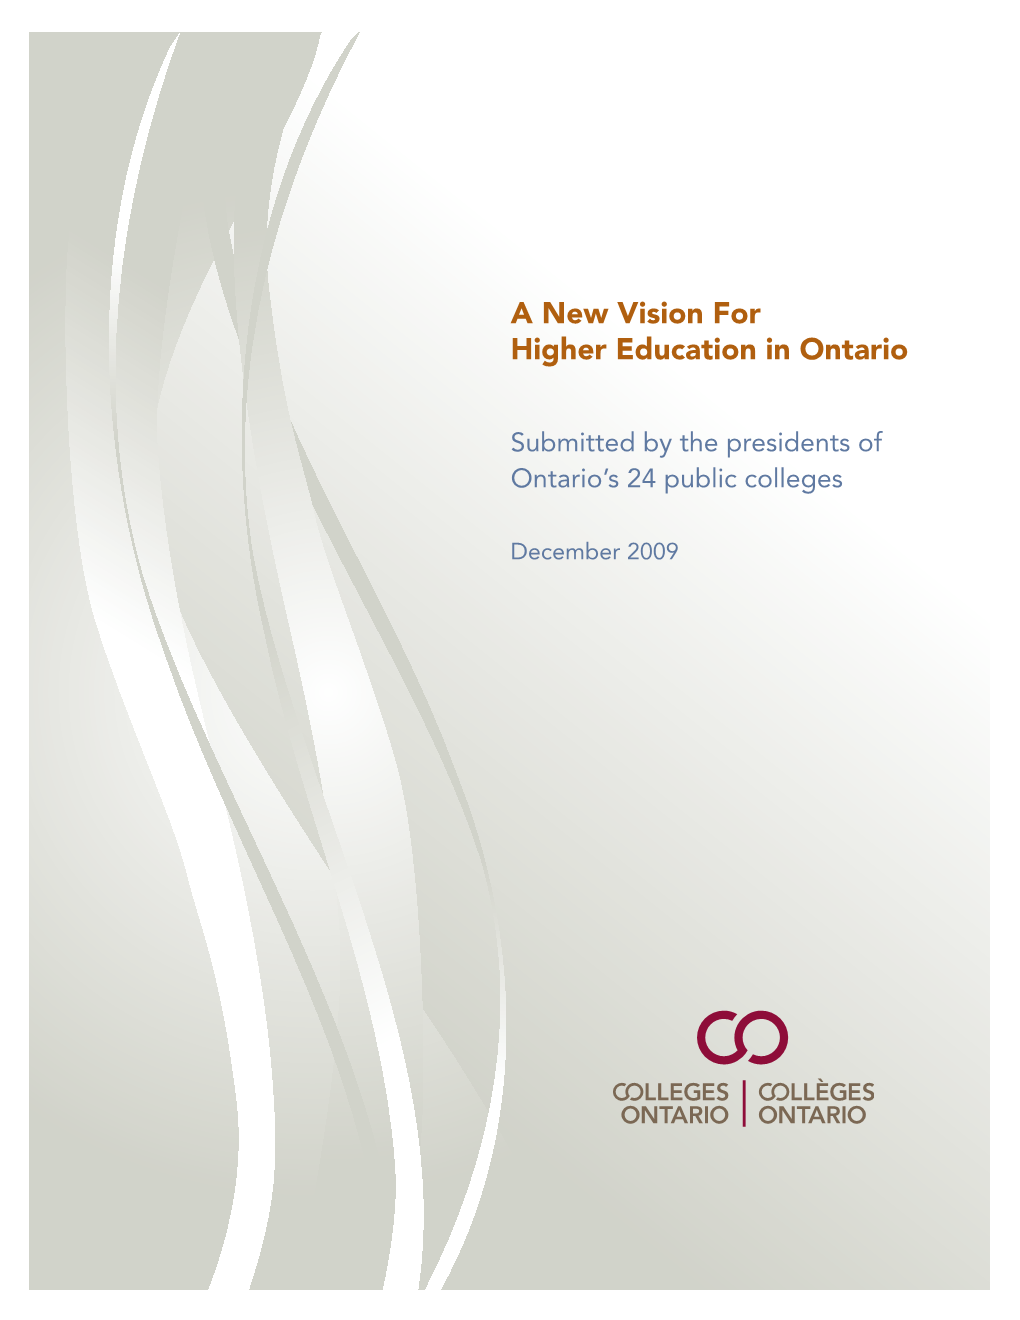 A New Vision for Higher Education in Ontario